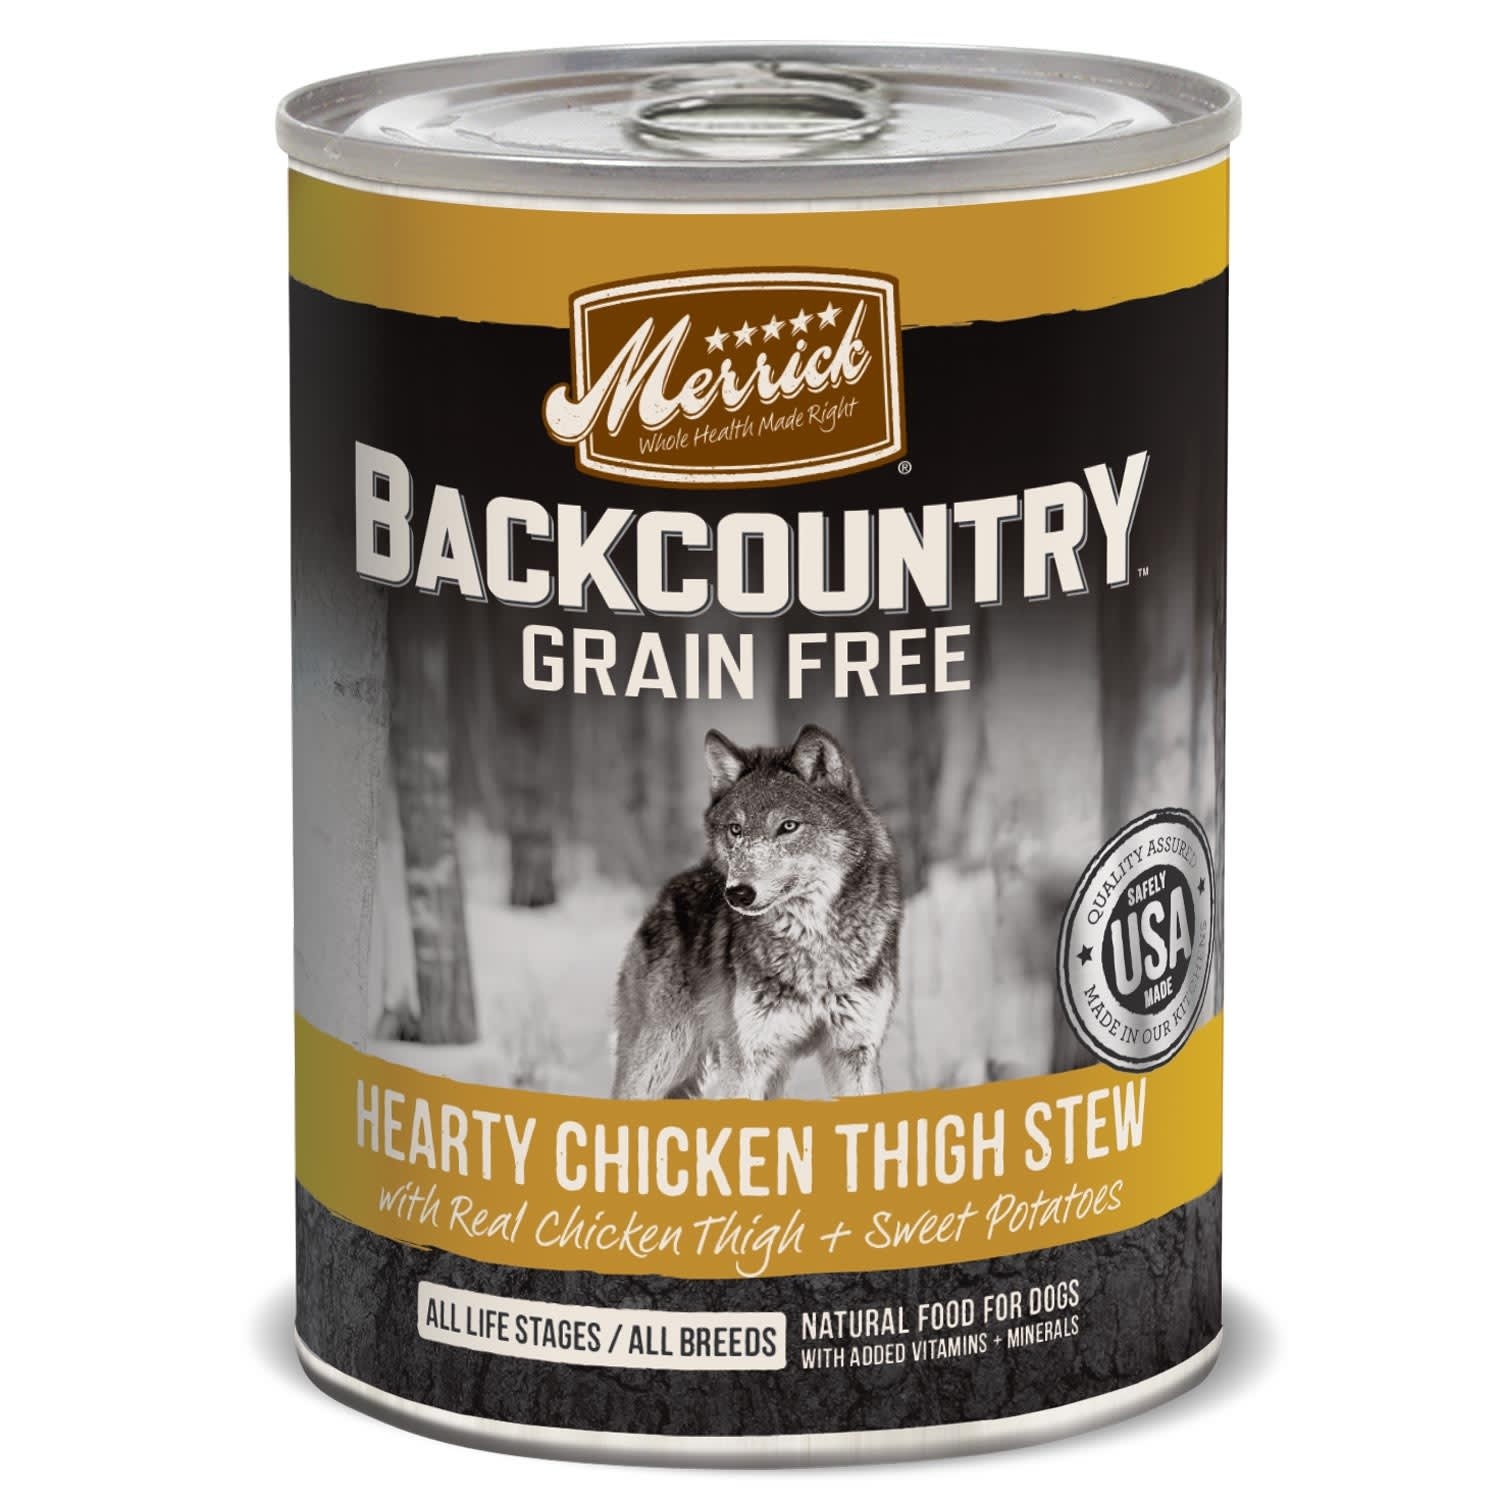 slide 1 of 1, Merrick Backcountry Grain Free Hearty Chicken Thigh Stew Canned Dog Food, 12.7 oz